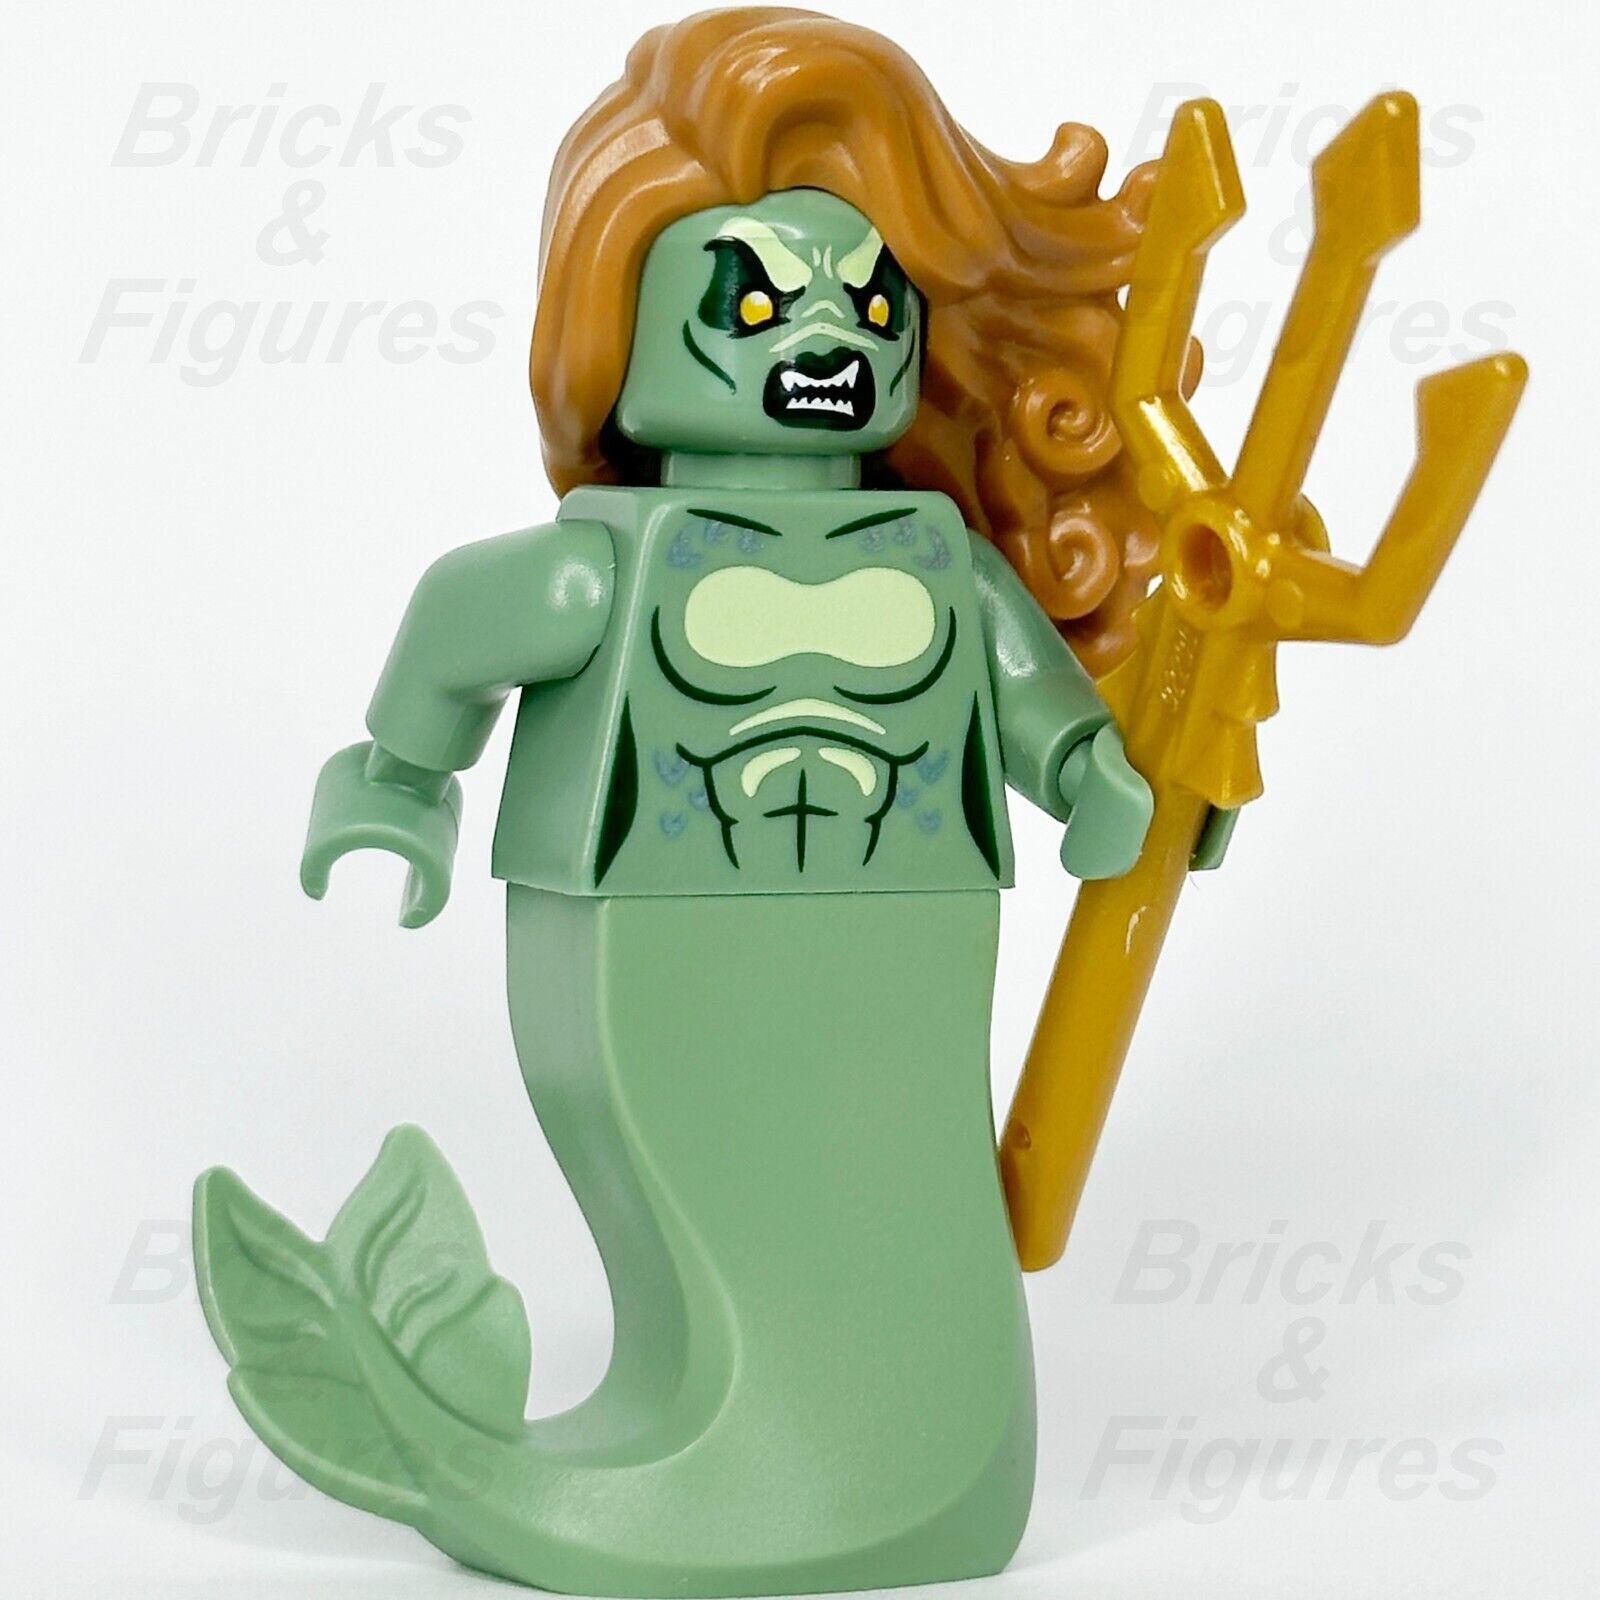 LEGO HARRY POTTER MERPERSON MINIFIGURE MERMAID MINIFIG GOBLET OF FIRE HP417 76420 03